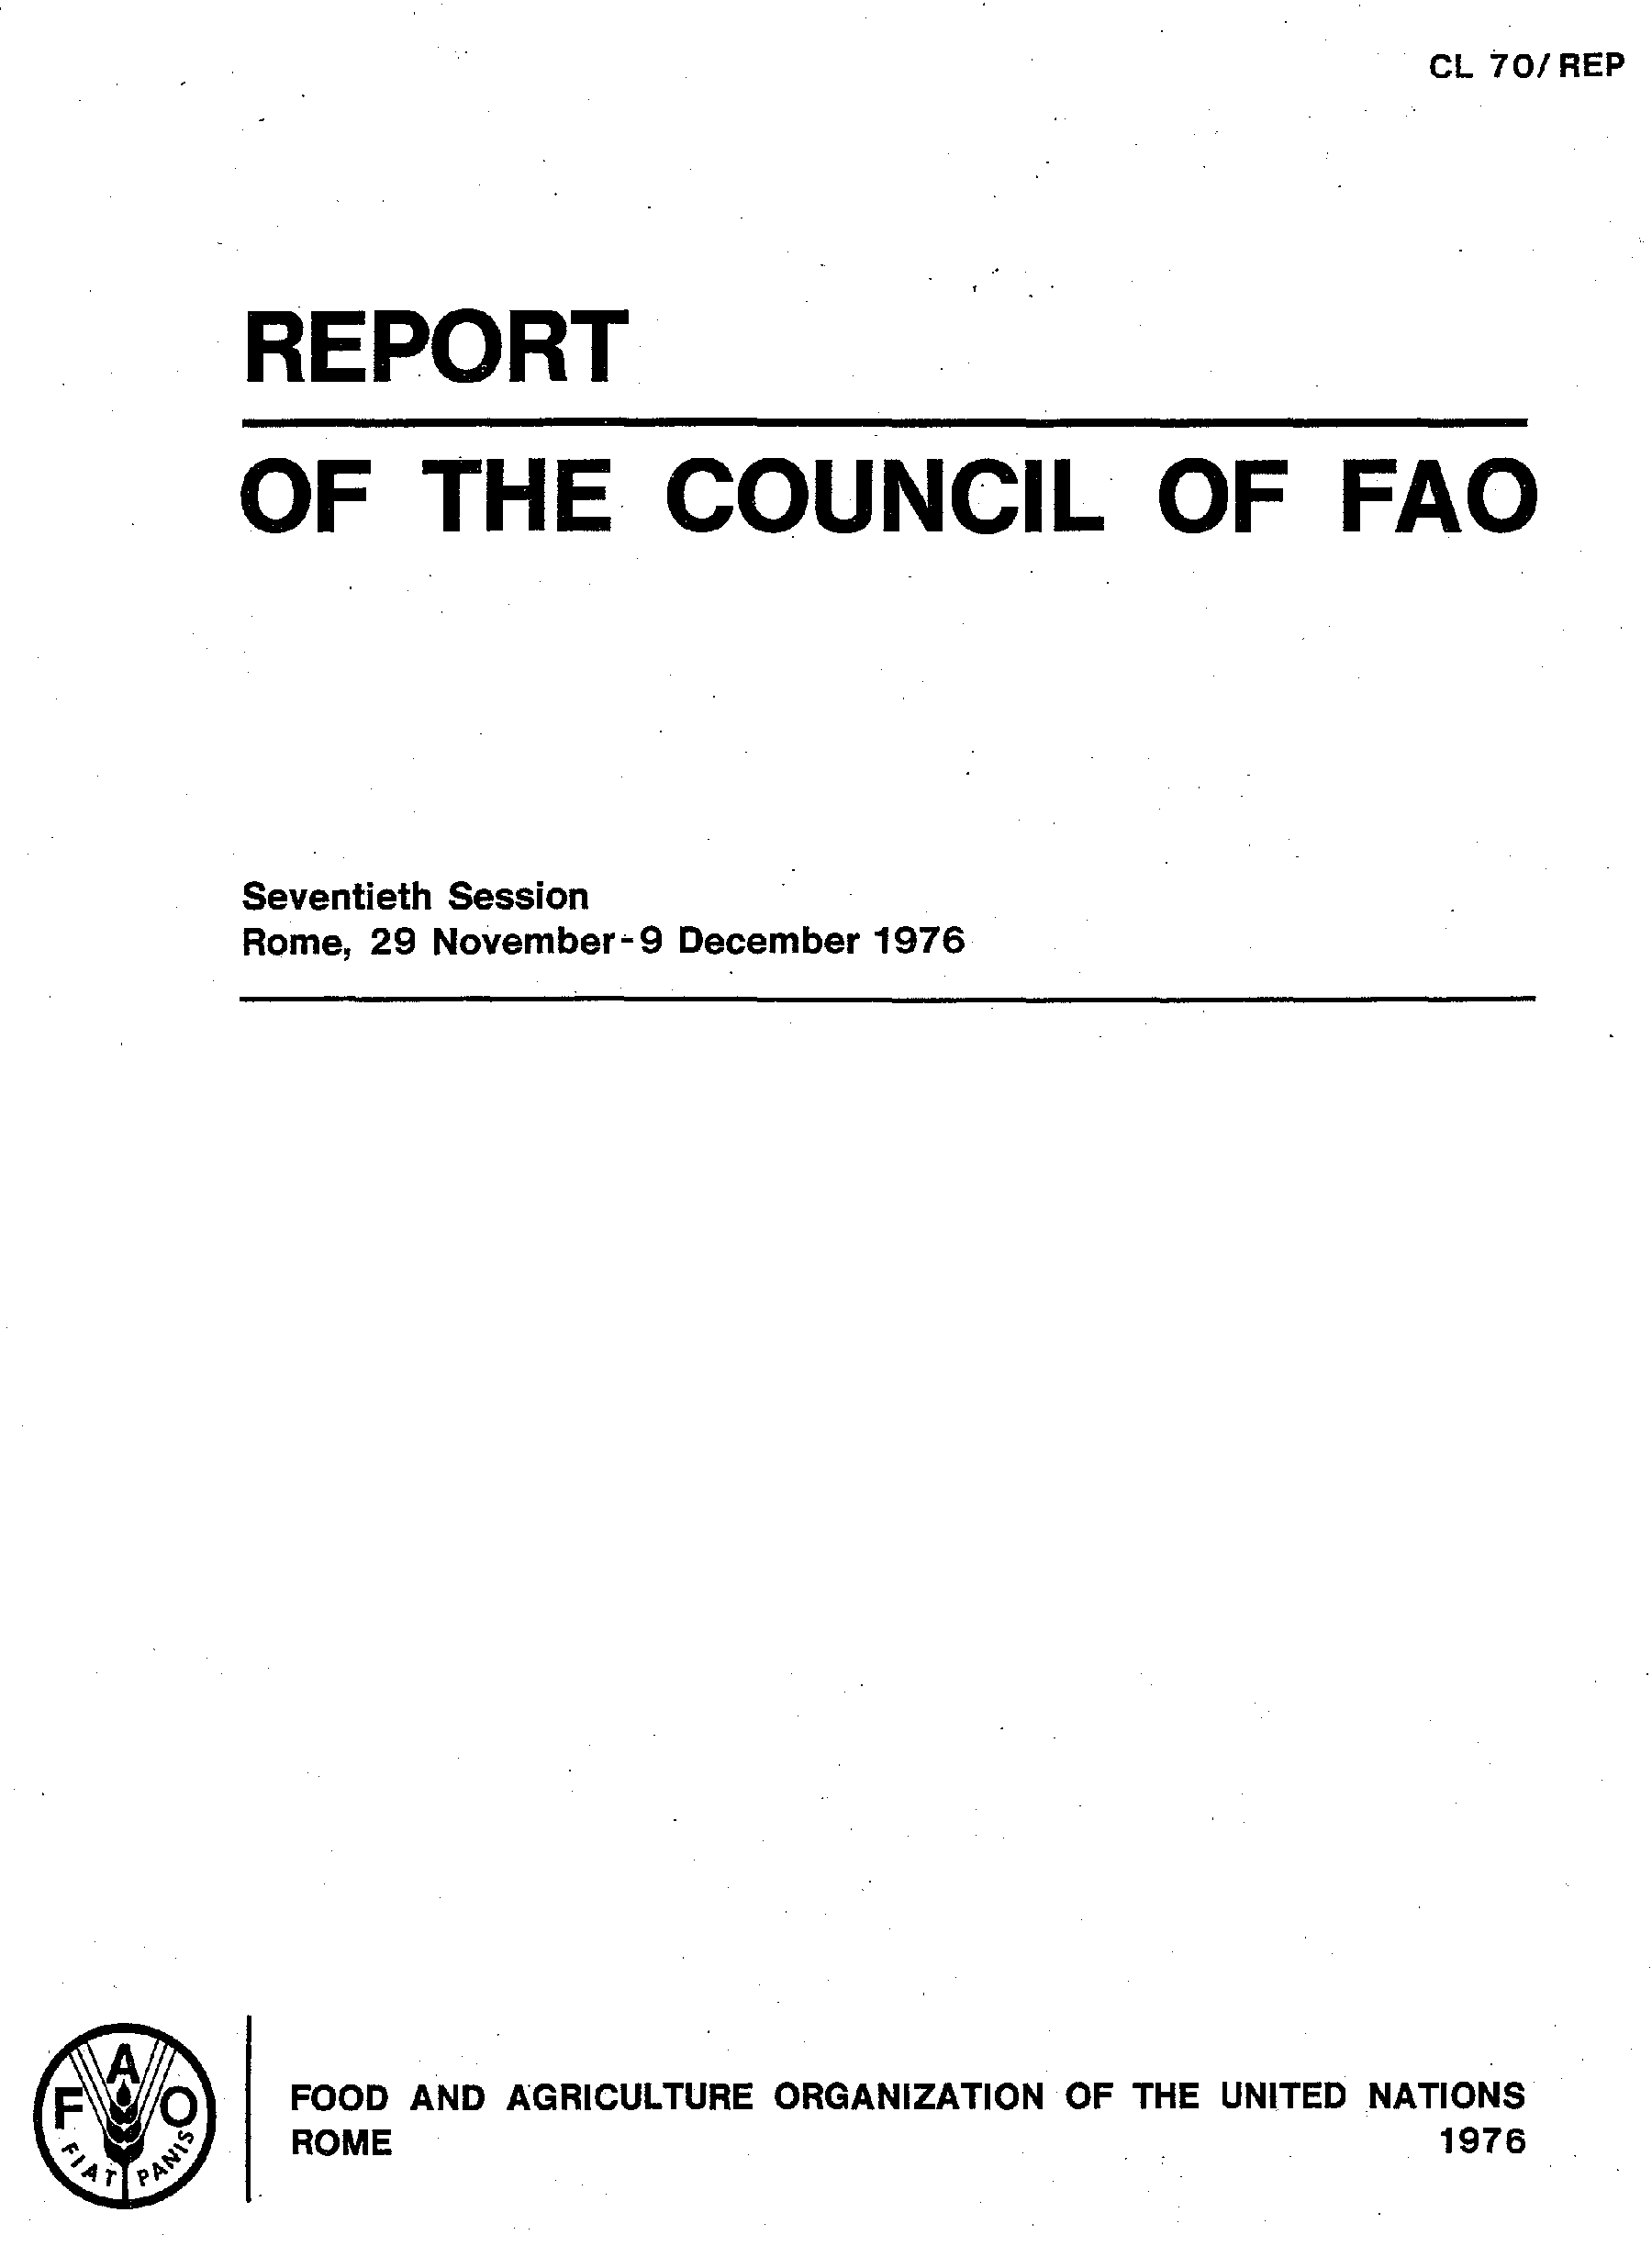 REPORT OF THE COUNCIL OF FAO